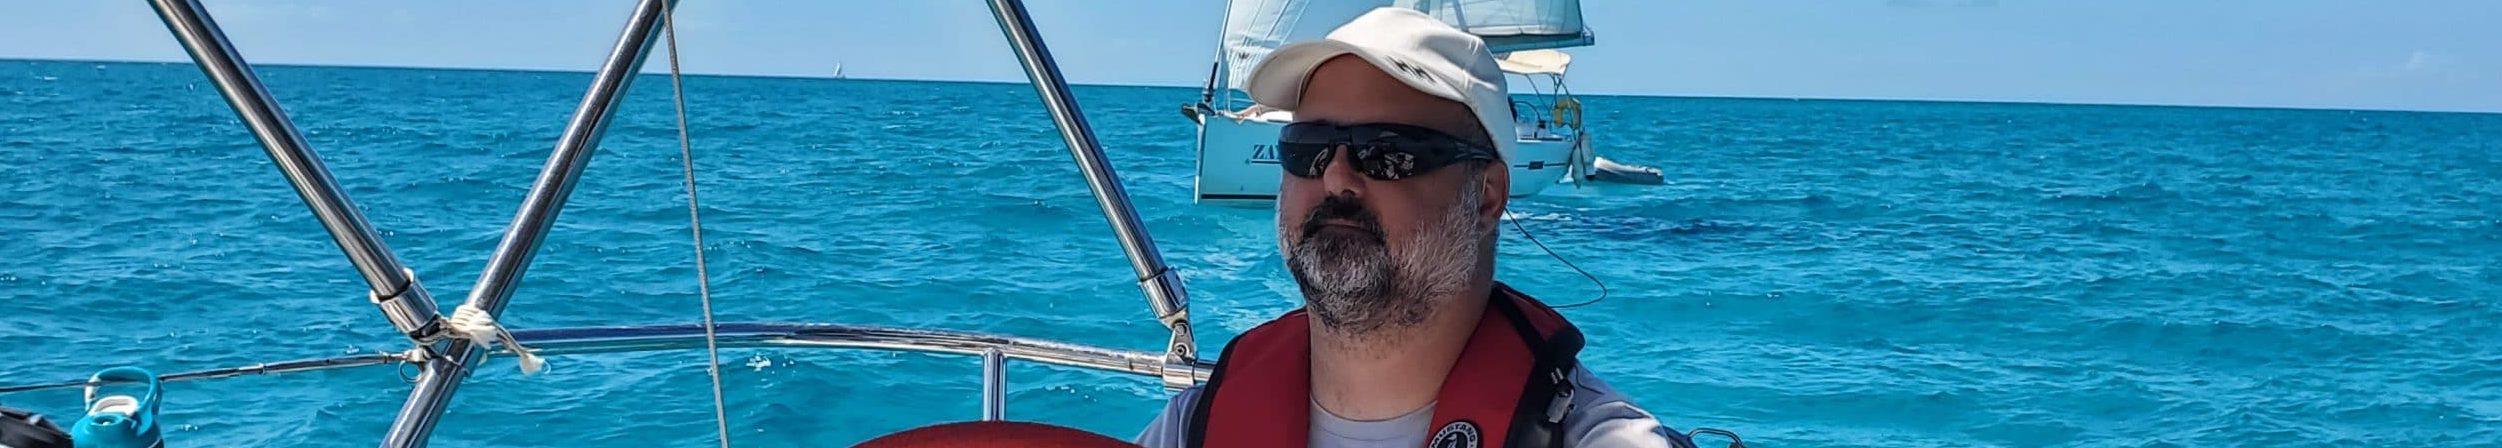 Stage voile Bareboat Skipper aux Bahamas